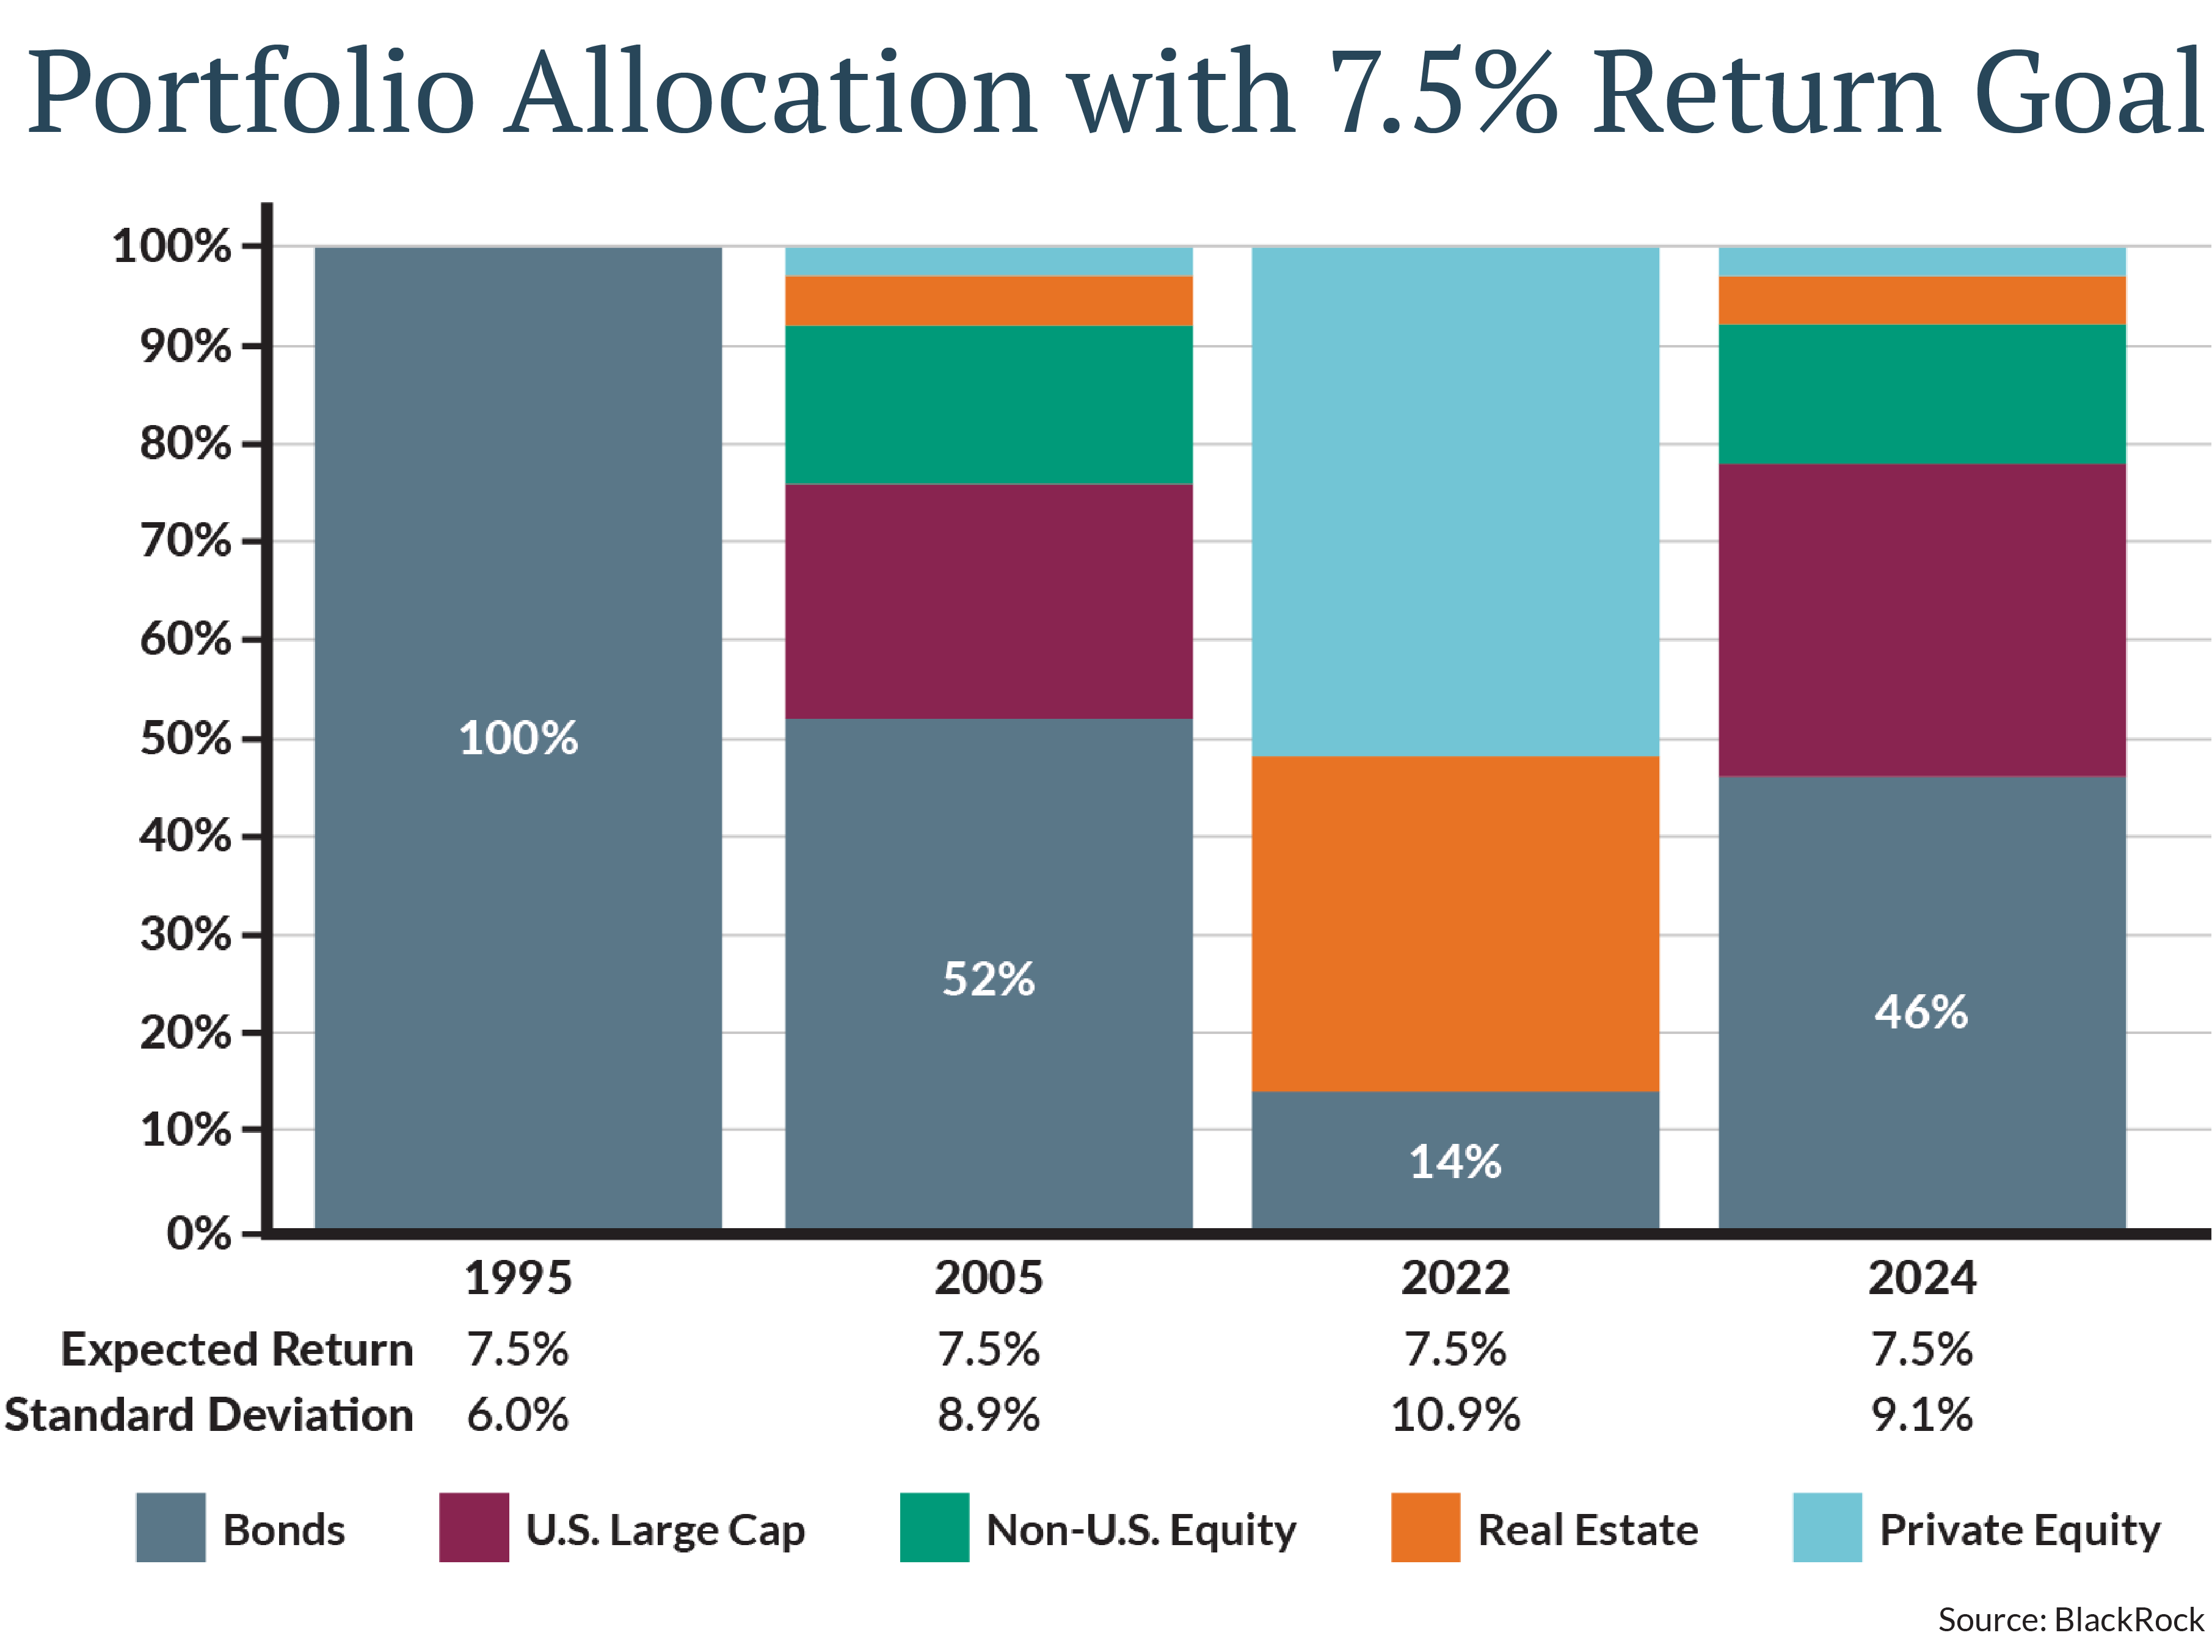 The image shows the portfolio allocation of a 7.5% return goal. The portfolio is allocated between bonds, US large cap stocks, non-US equity, real estate, and private equity.